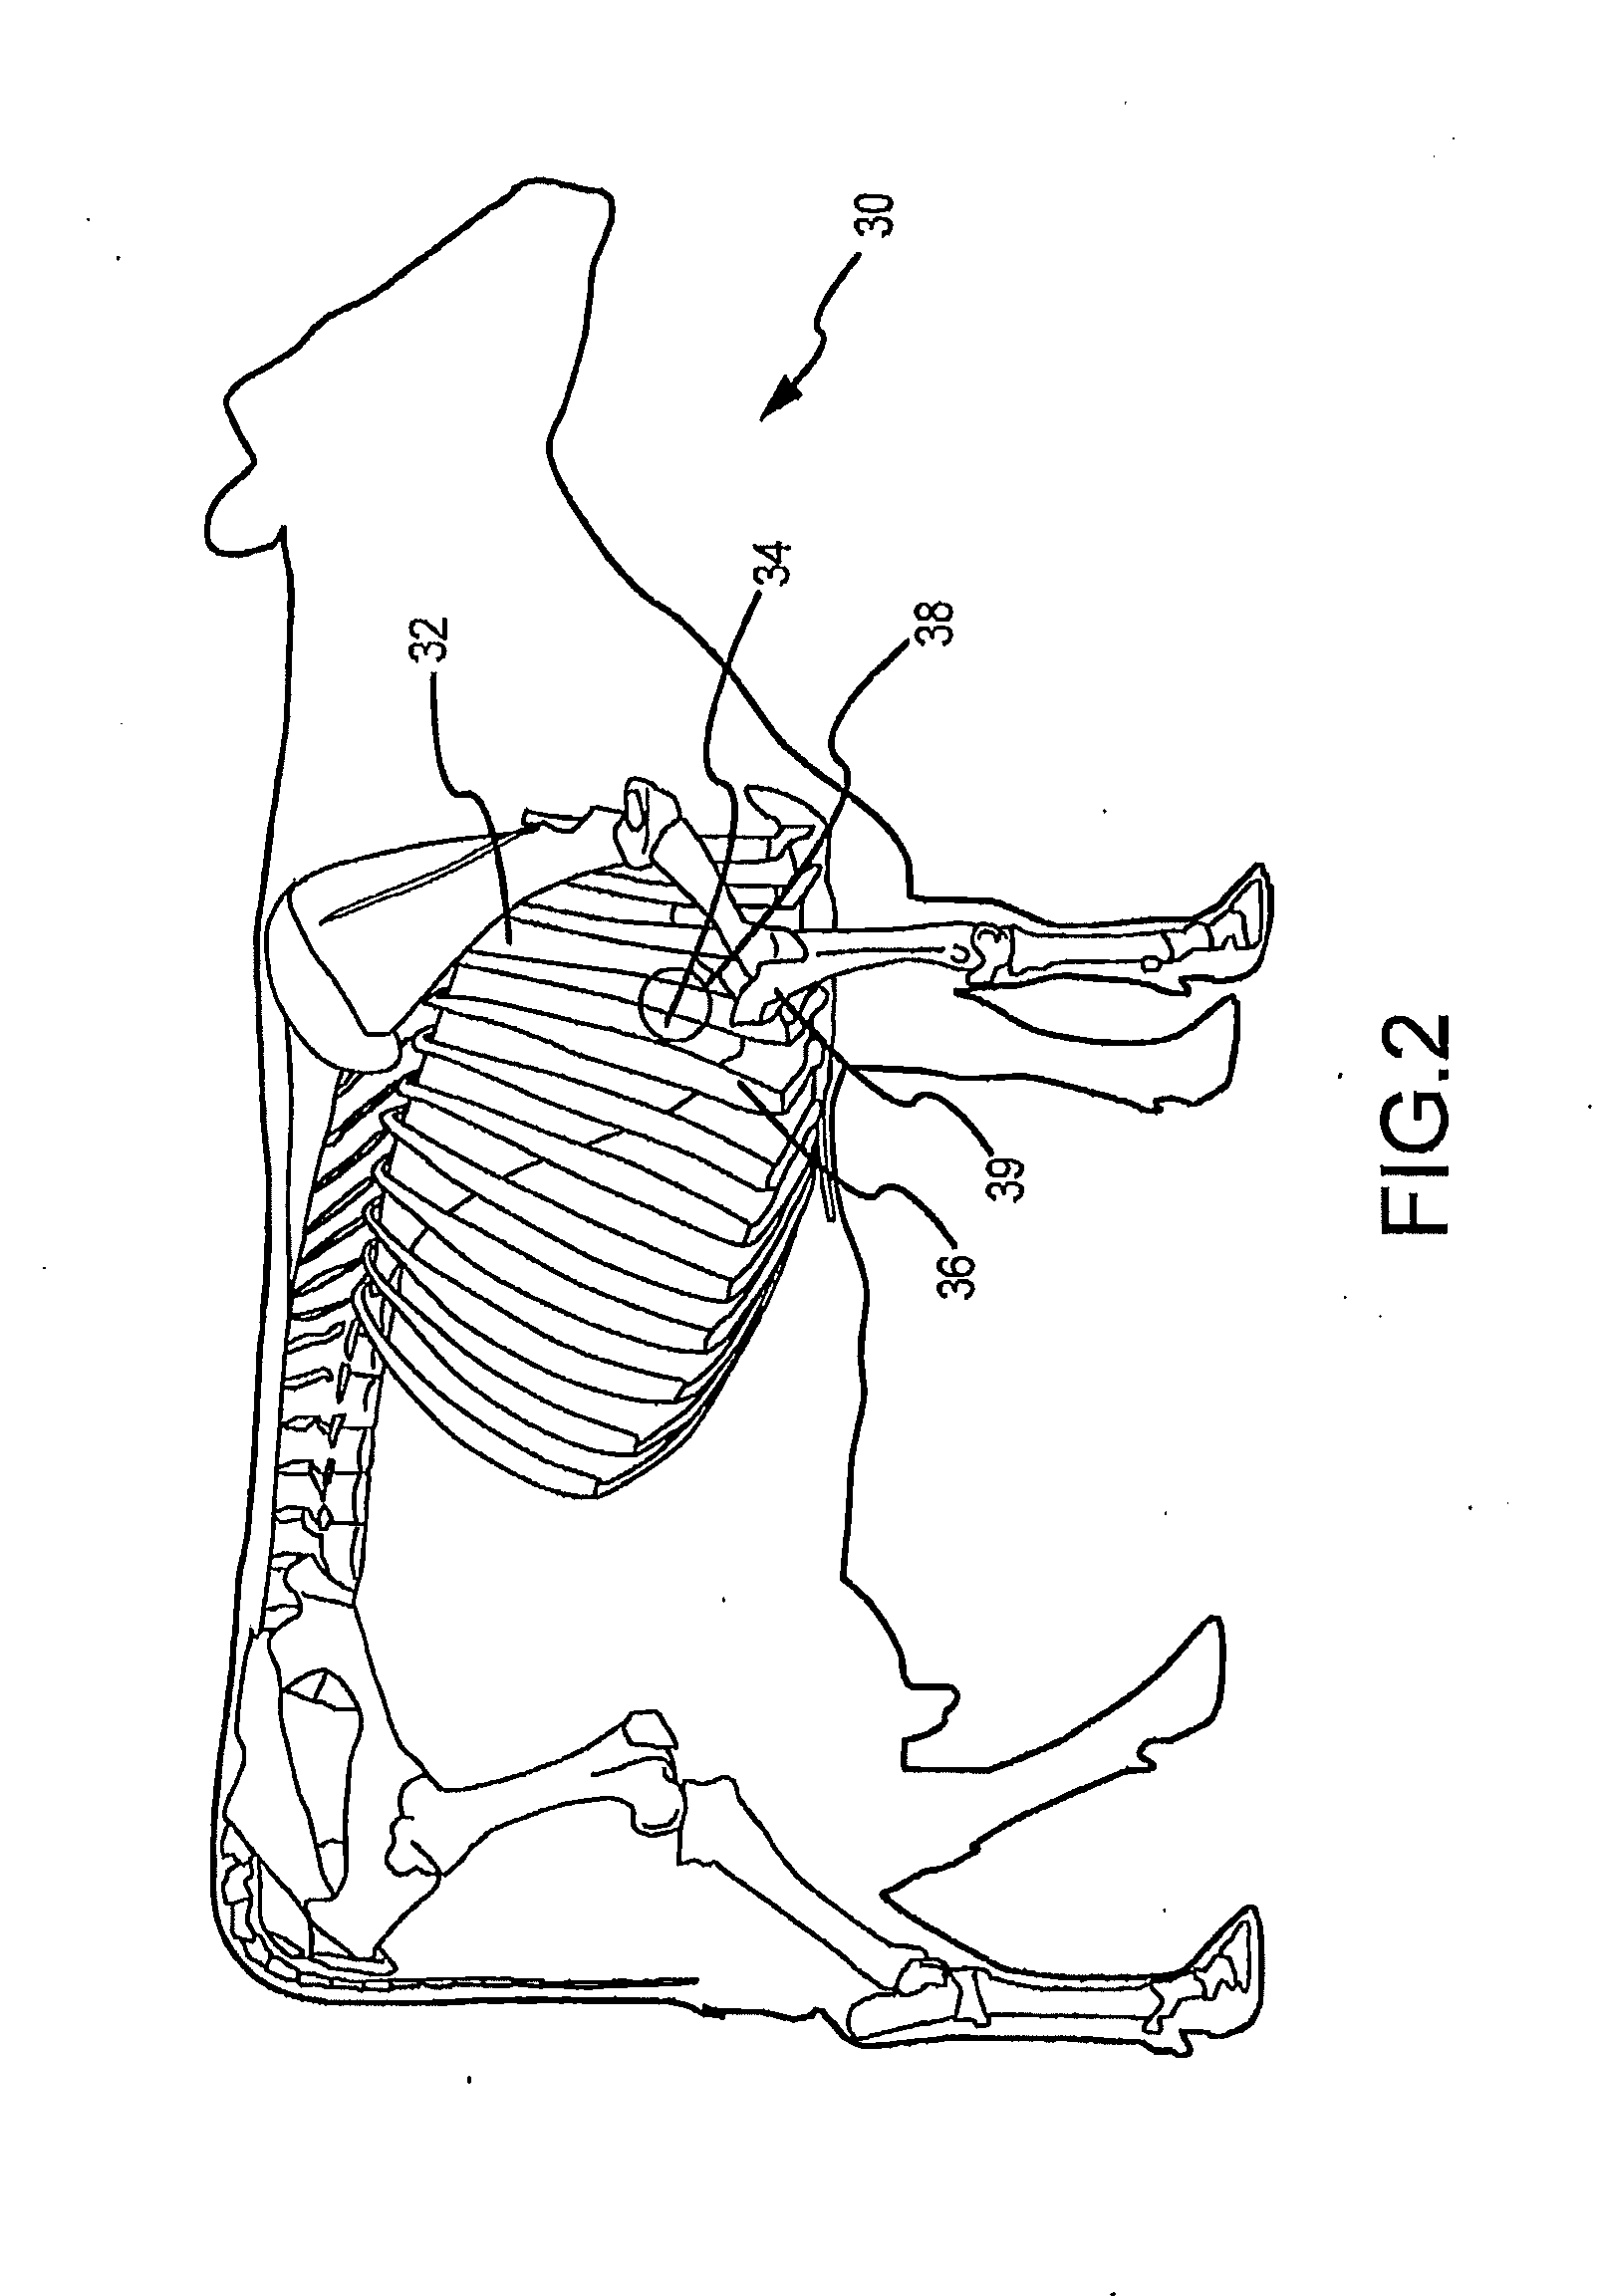 System and method for determining antibiotic effectiveness in respiratory diseased animals using ausculation analysis